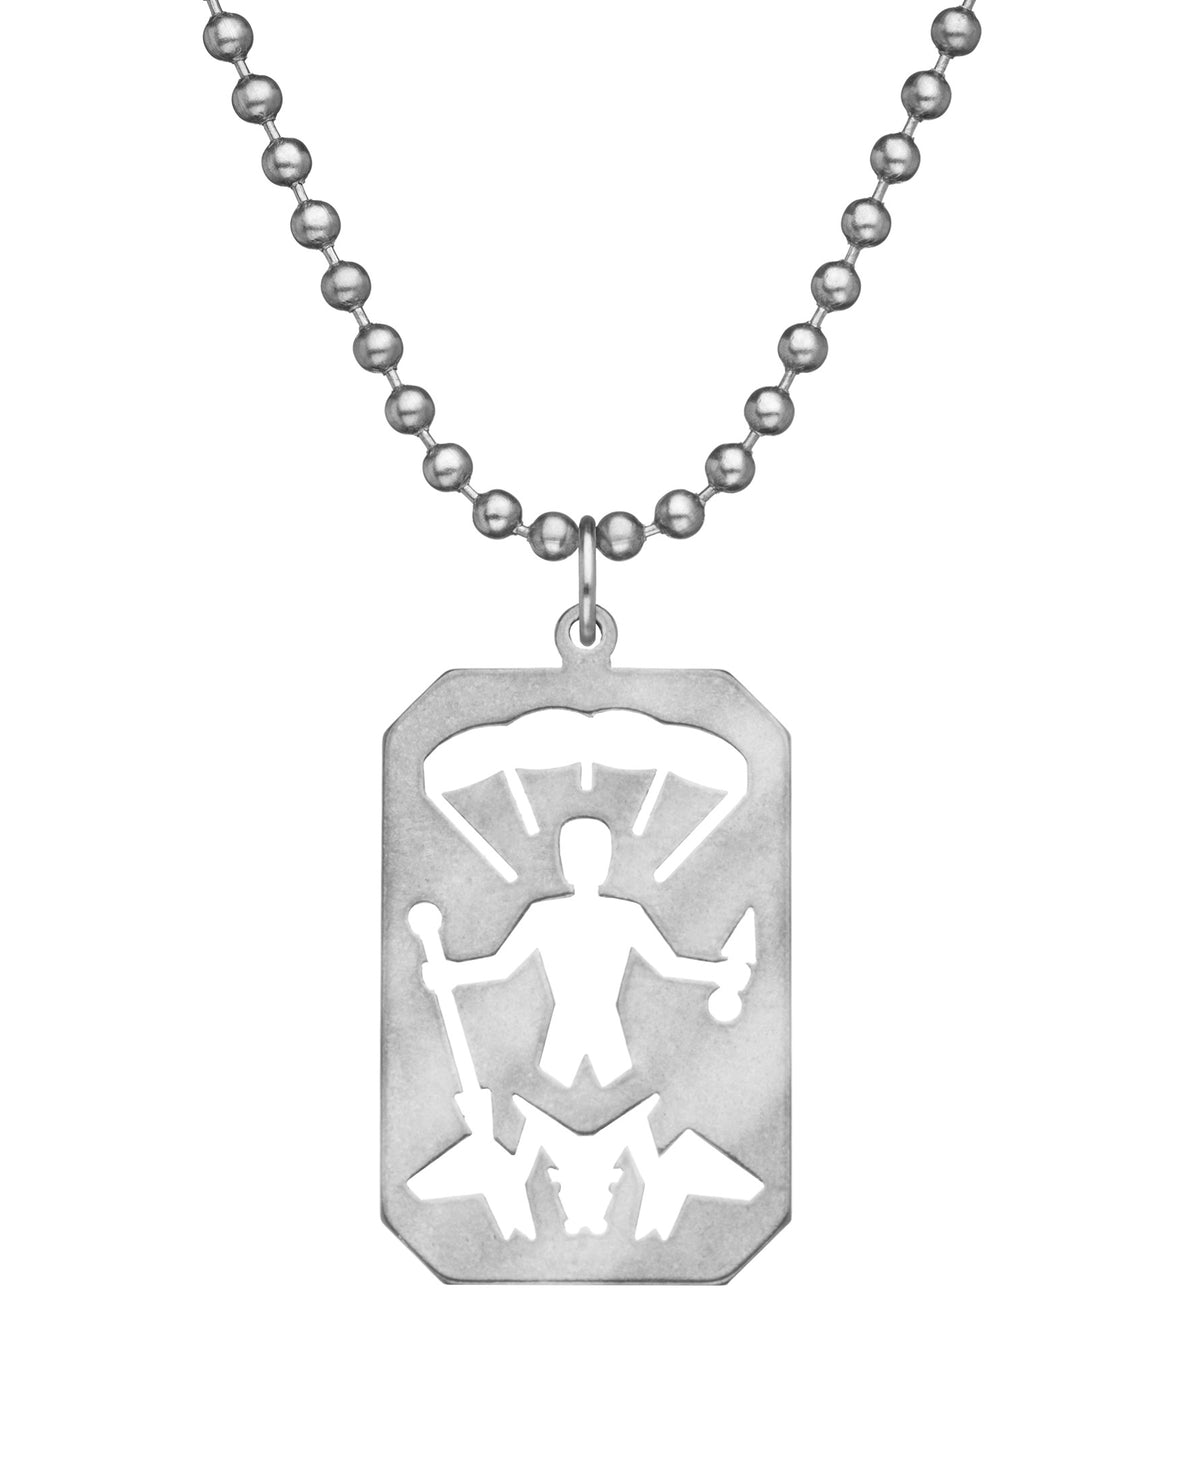 Genuine U.S. Military Issue St. Michael Necklace with Dog Tag Chain - CLEARANCE!